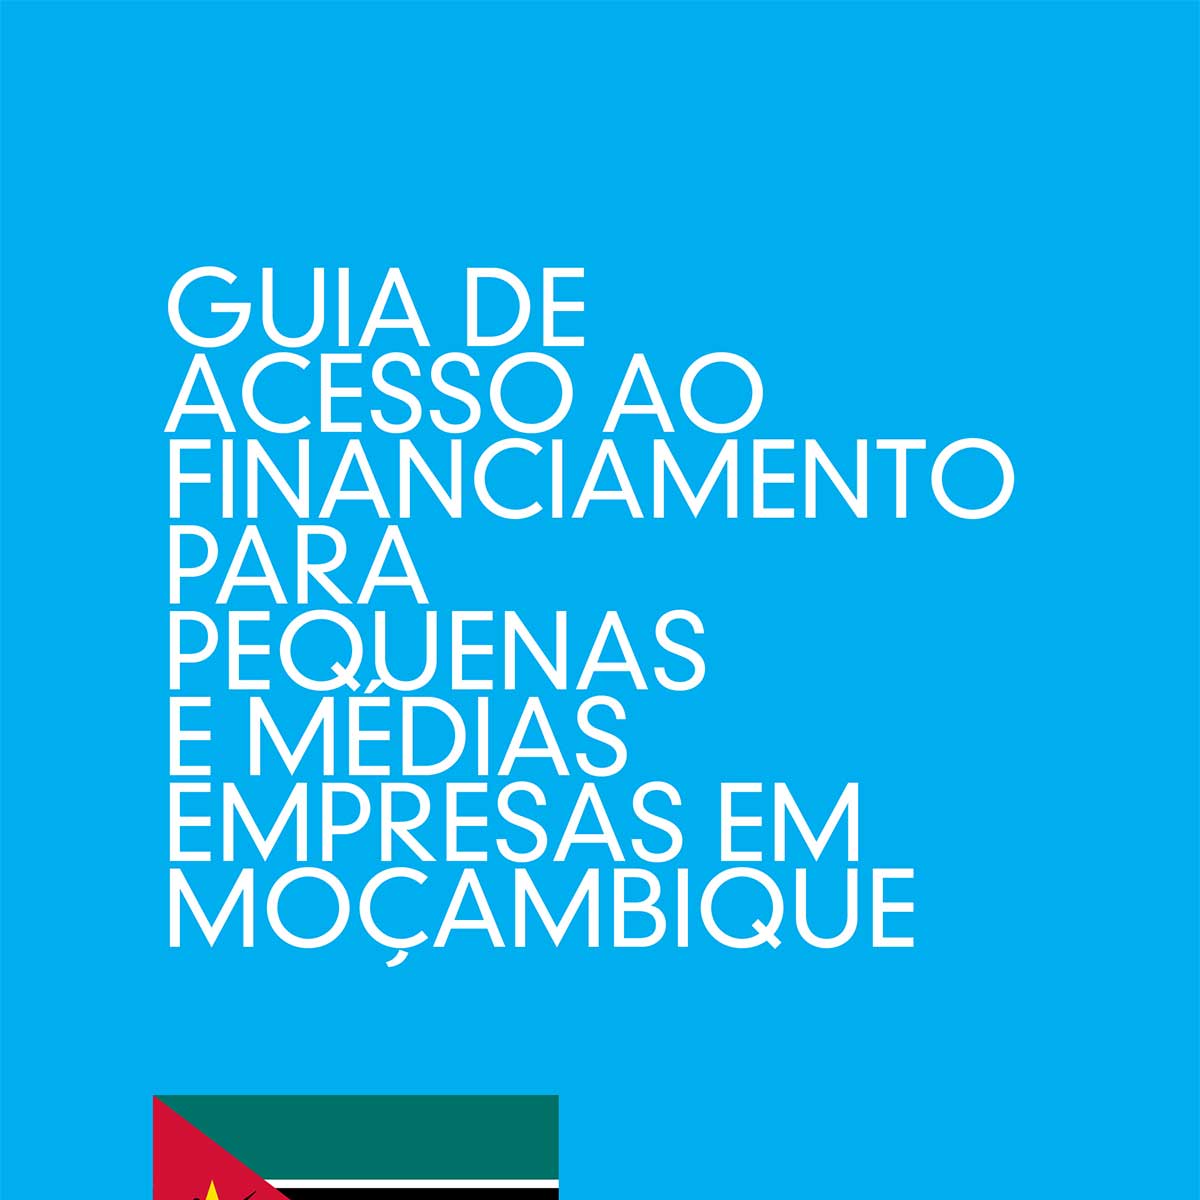 Access to Finance Guide for Small and Medium Sized Businesses in Mozambique (2016)